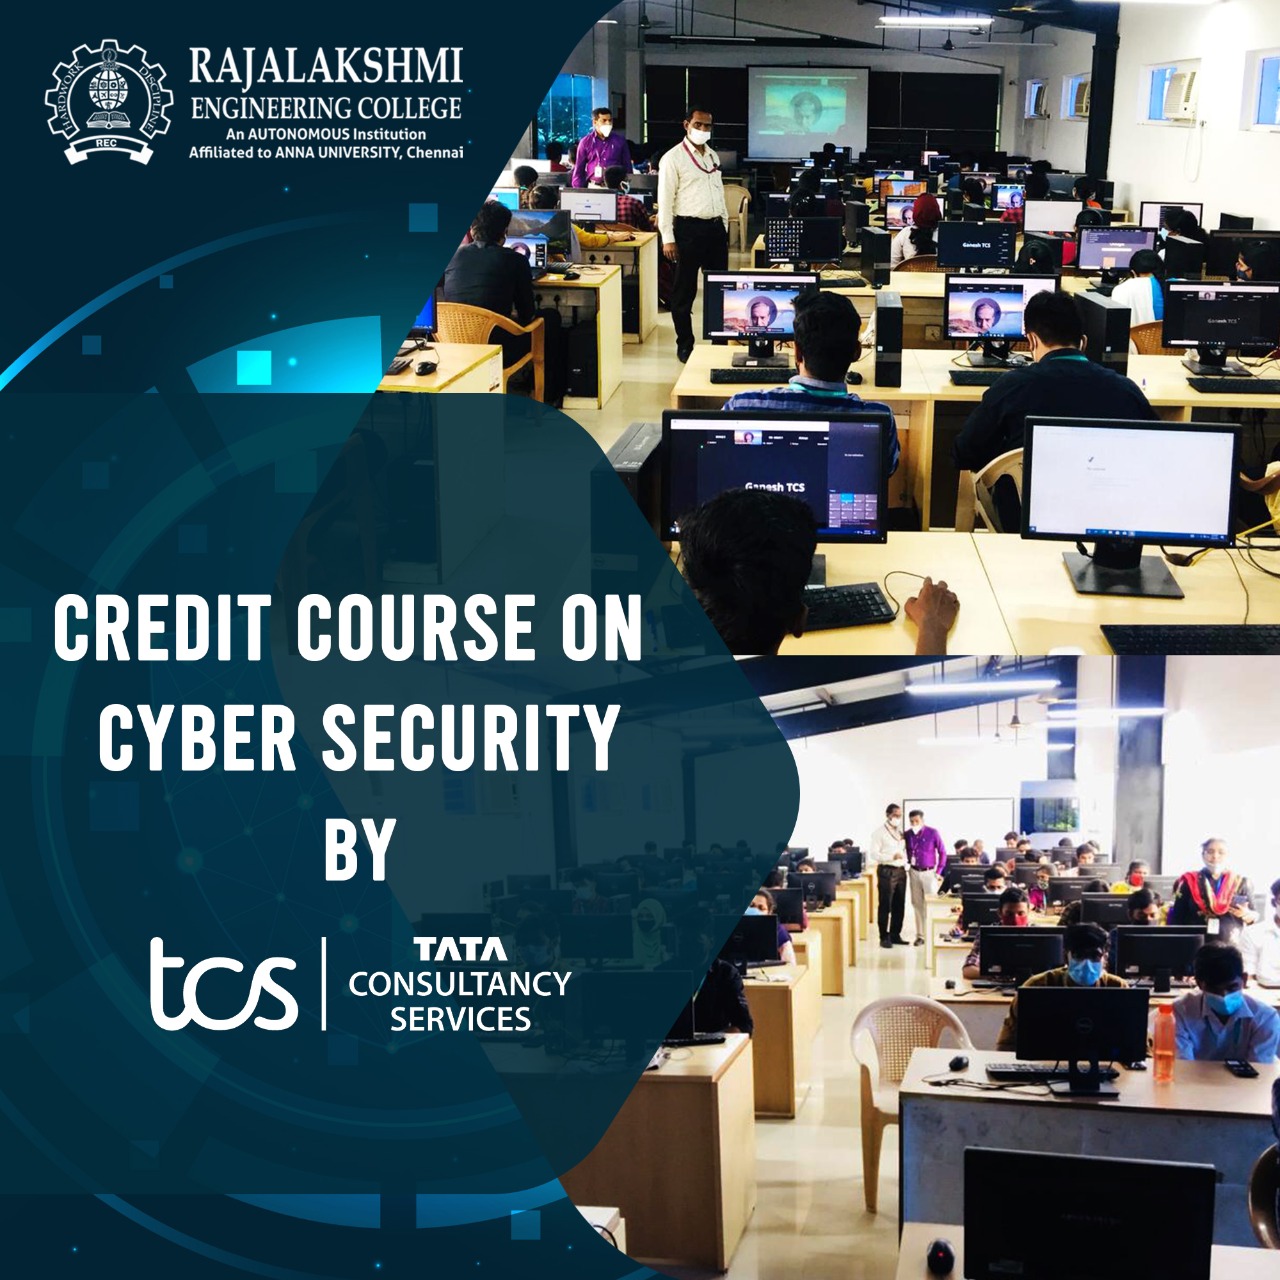 Credit Course on Cyber Security by TCS